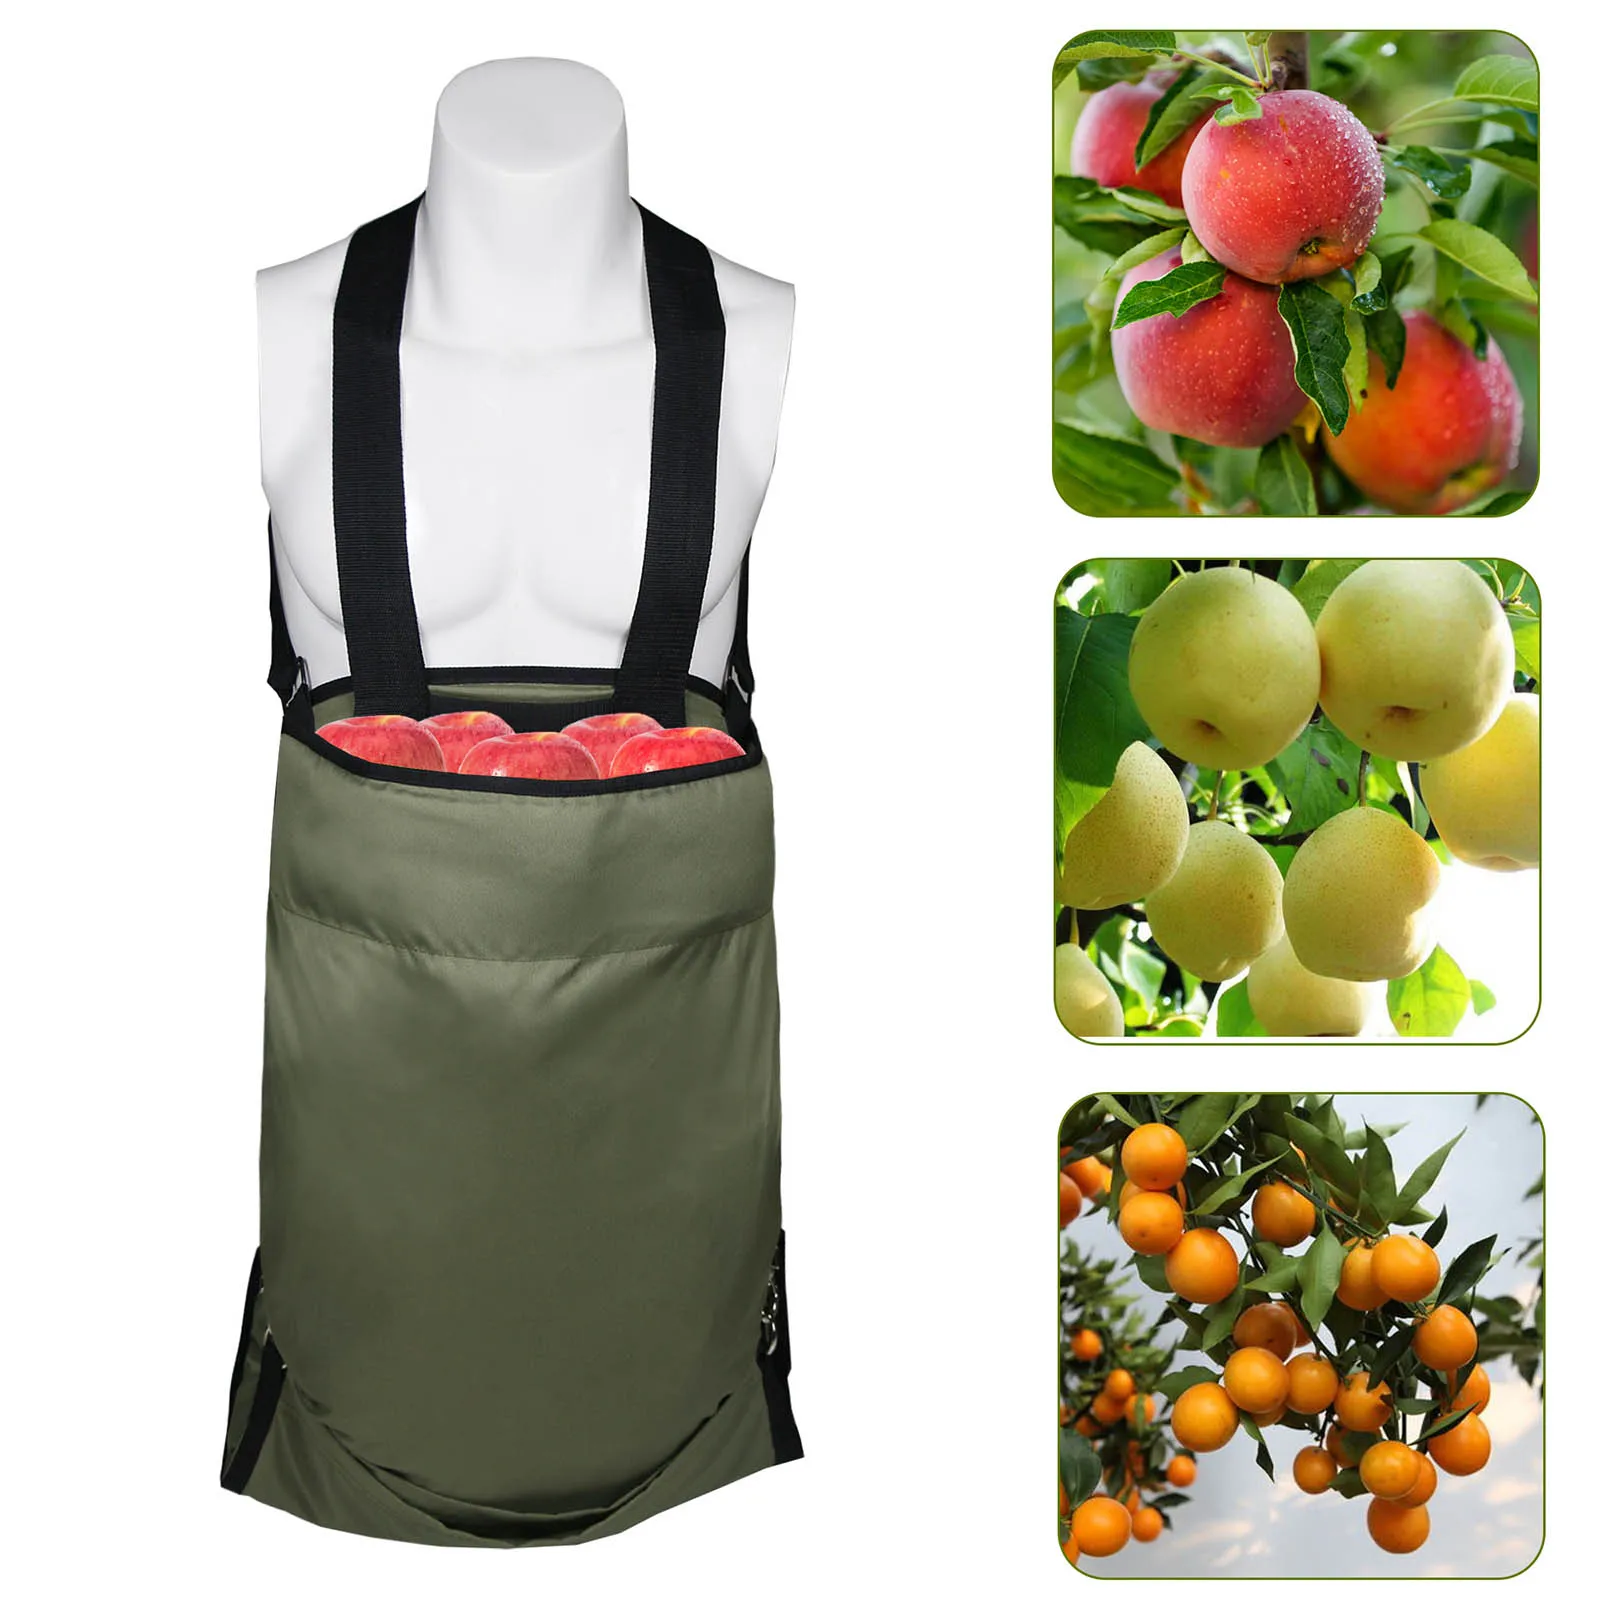 ZzoGri Garden Harvest Apron Bag with Pockets for Fruit Picking Grocery Storage 